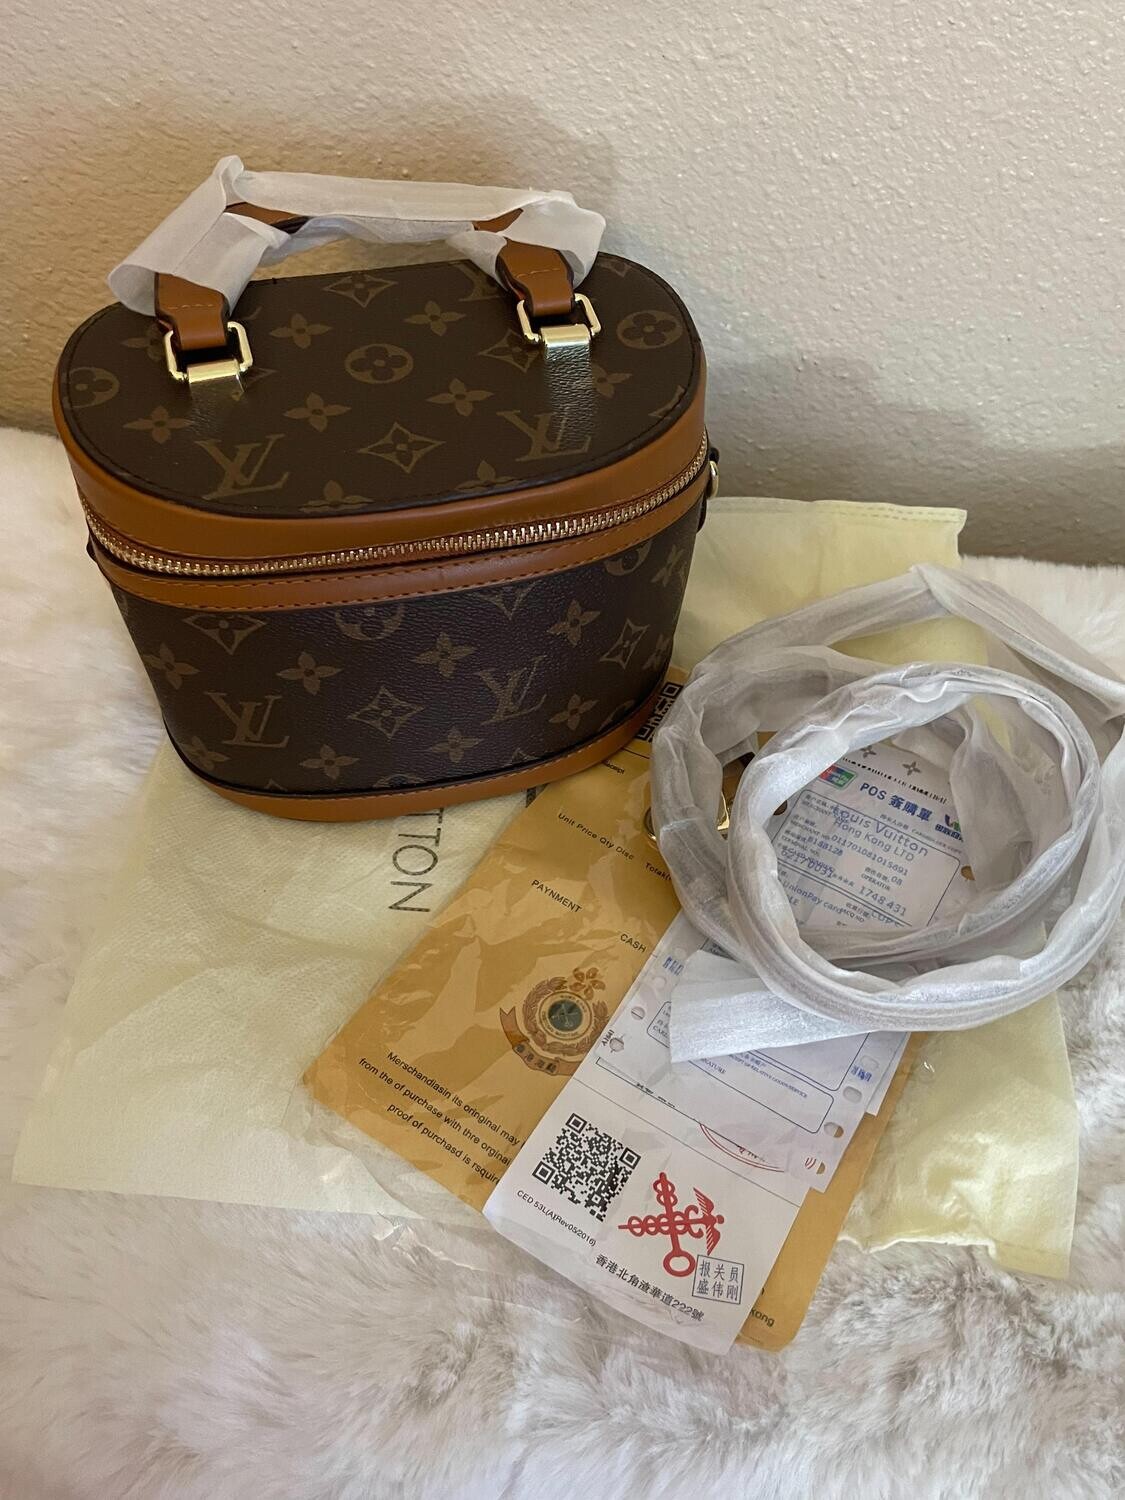 louis vuitton brand products